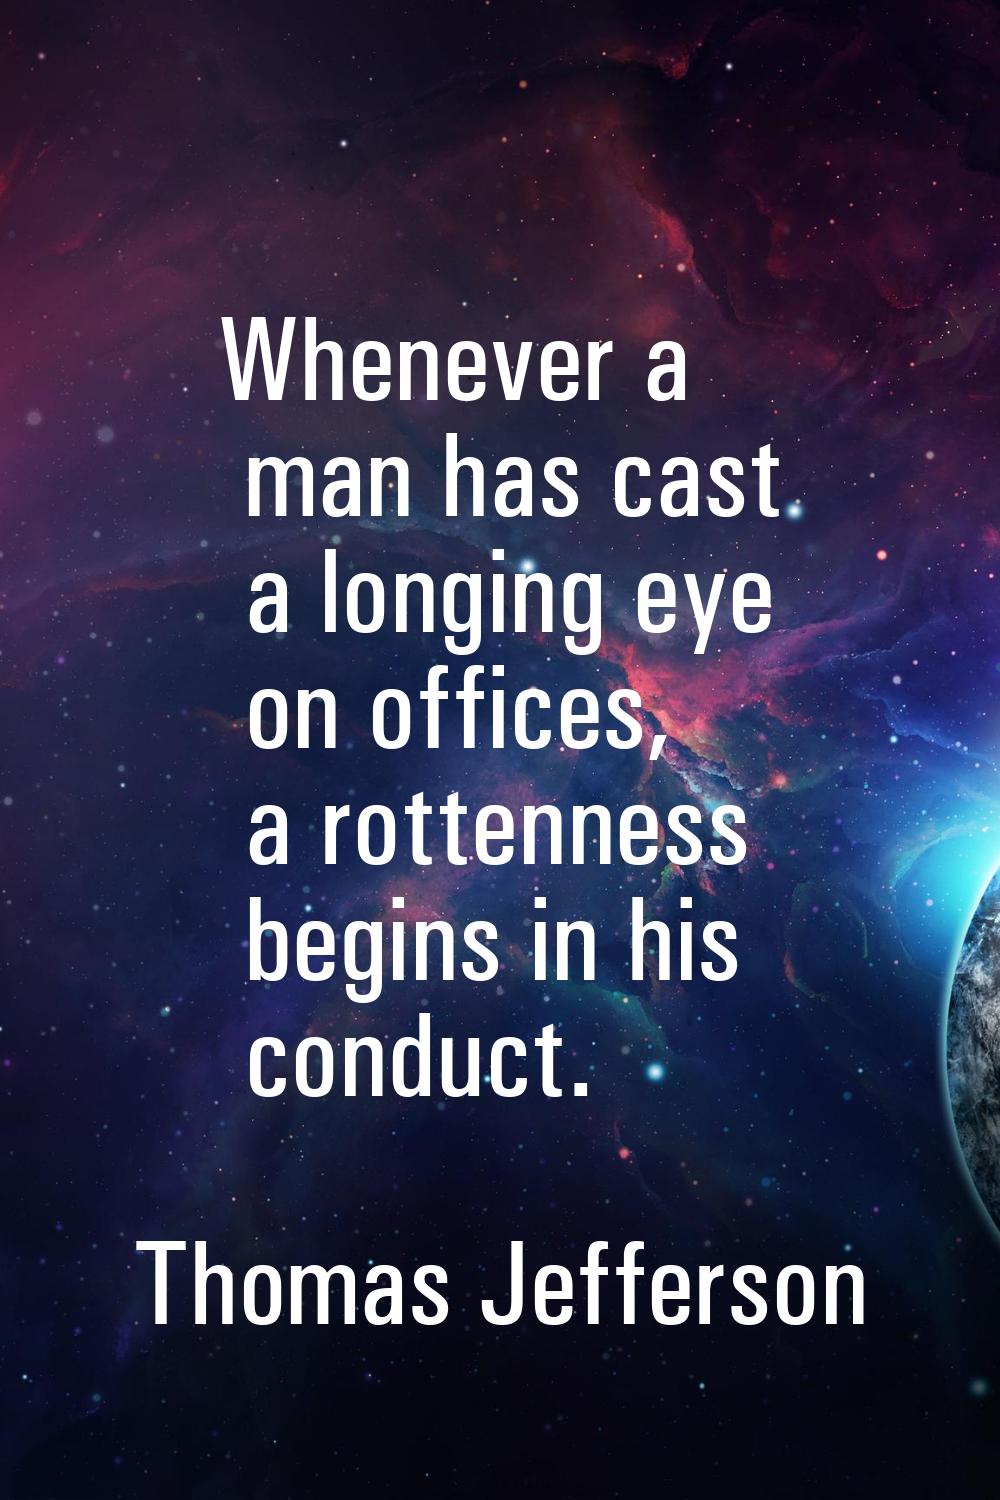 Whenever a man has cast a longing eye on offices, a rottenness begins in his conduct.